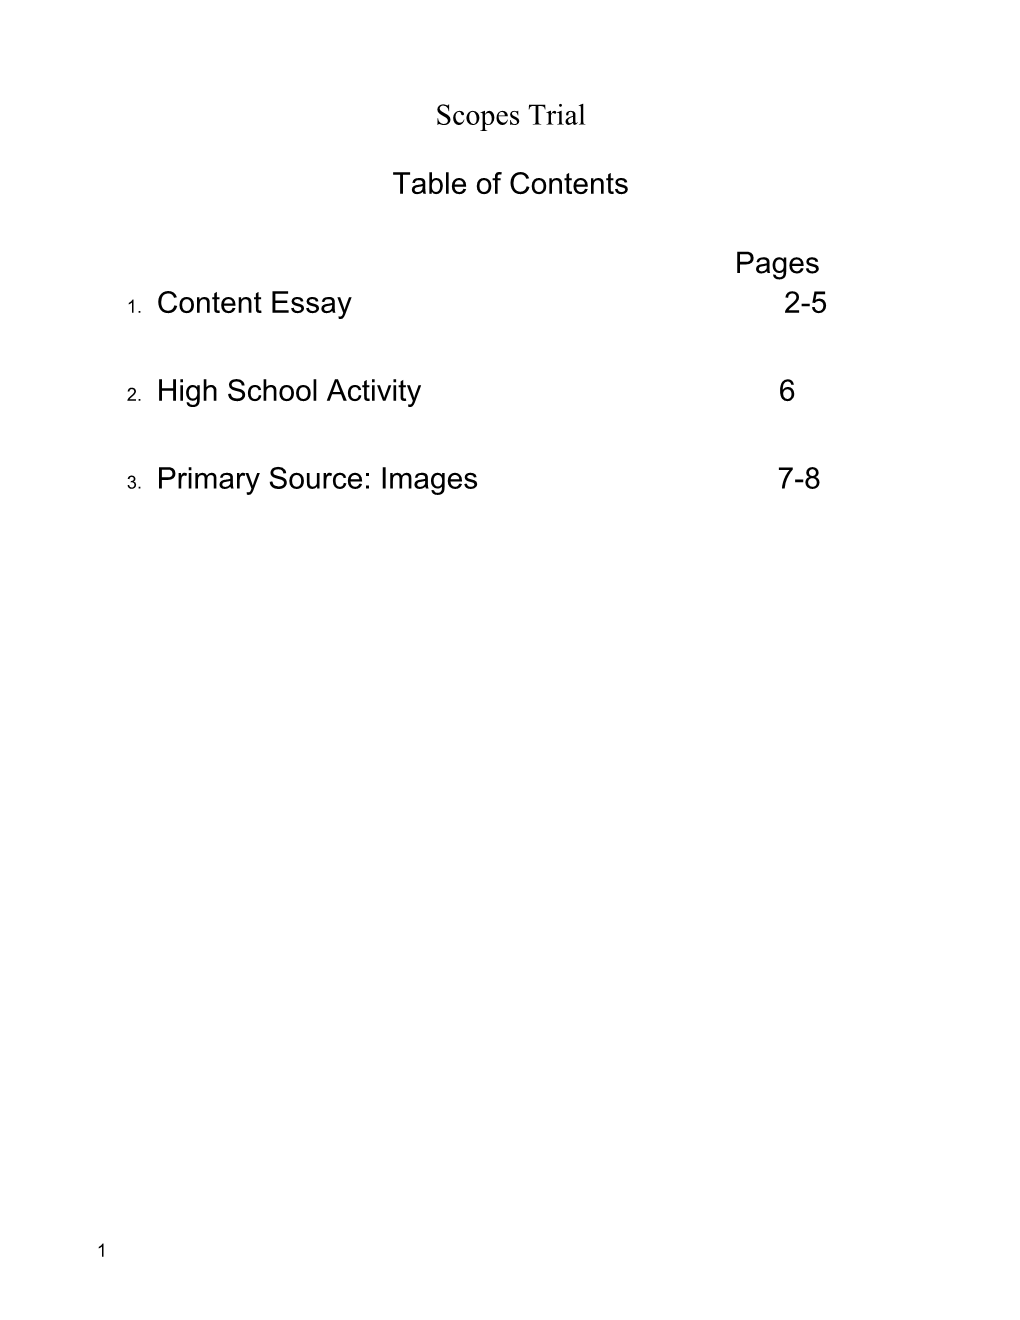 Table of Contents s238